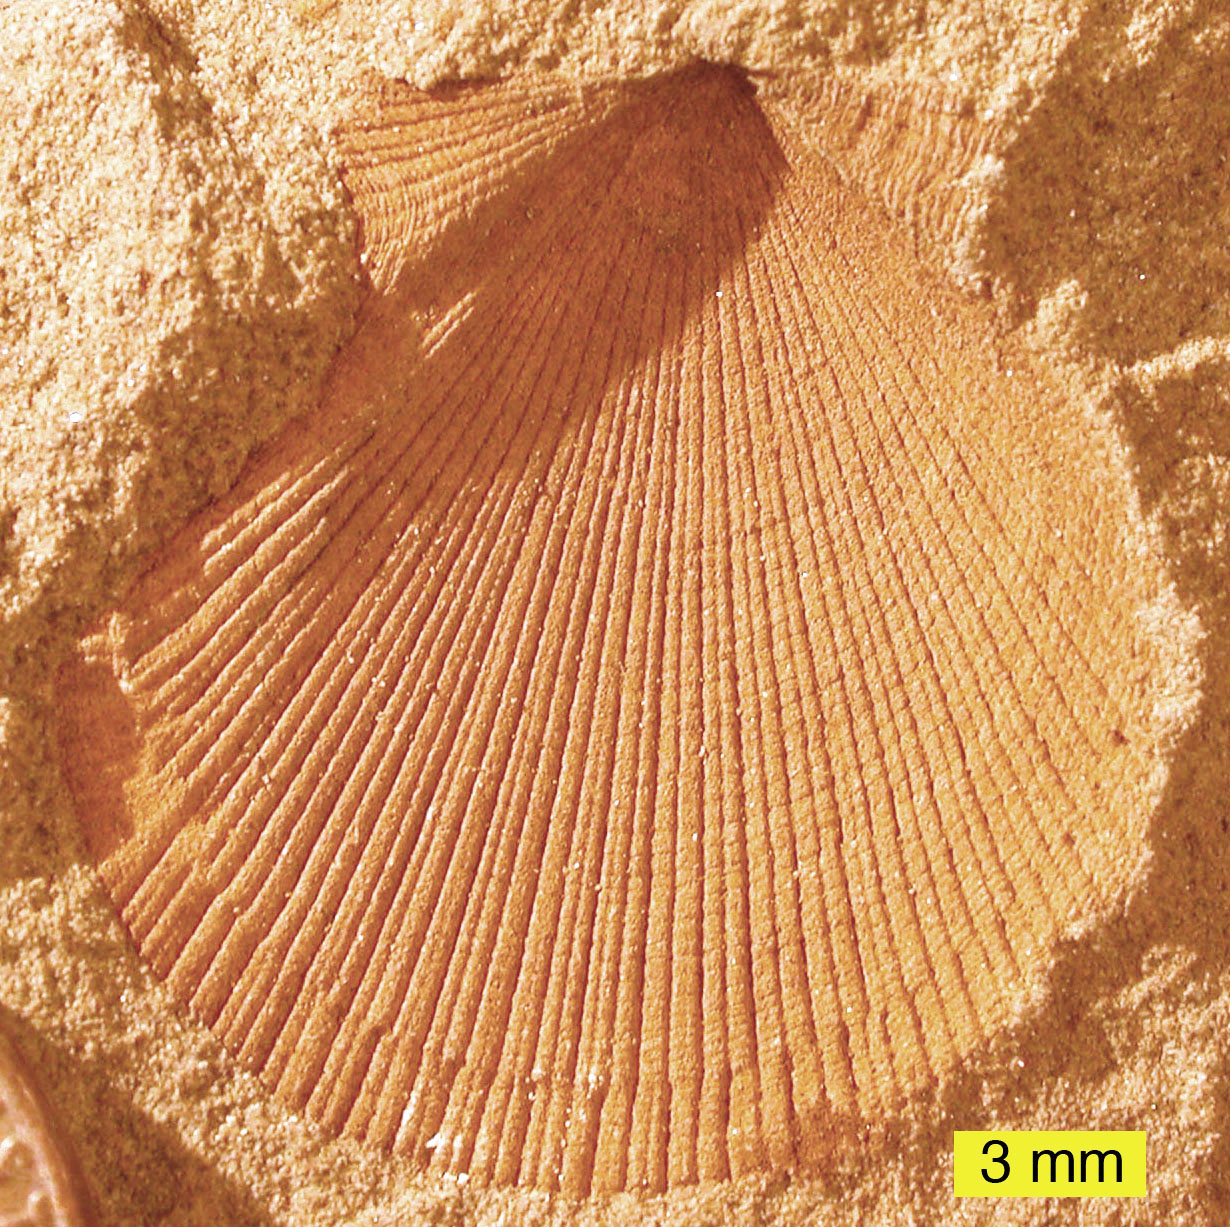 Photograph of a fossil that is a mold of a bivalve mollusc shell.